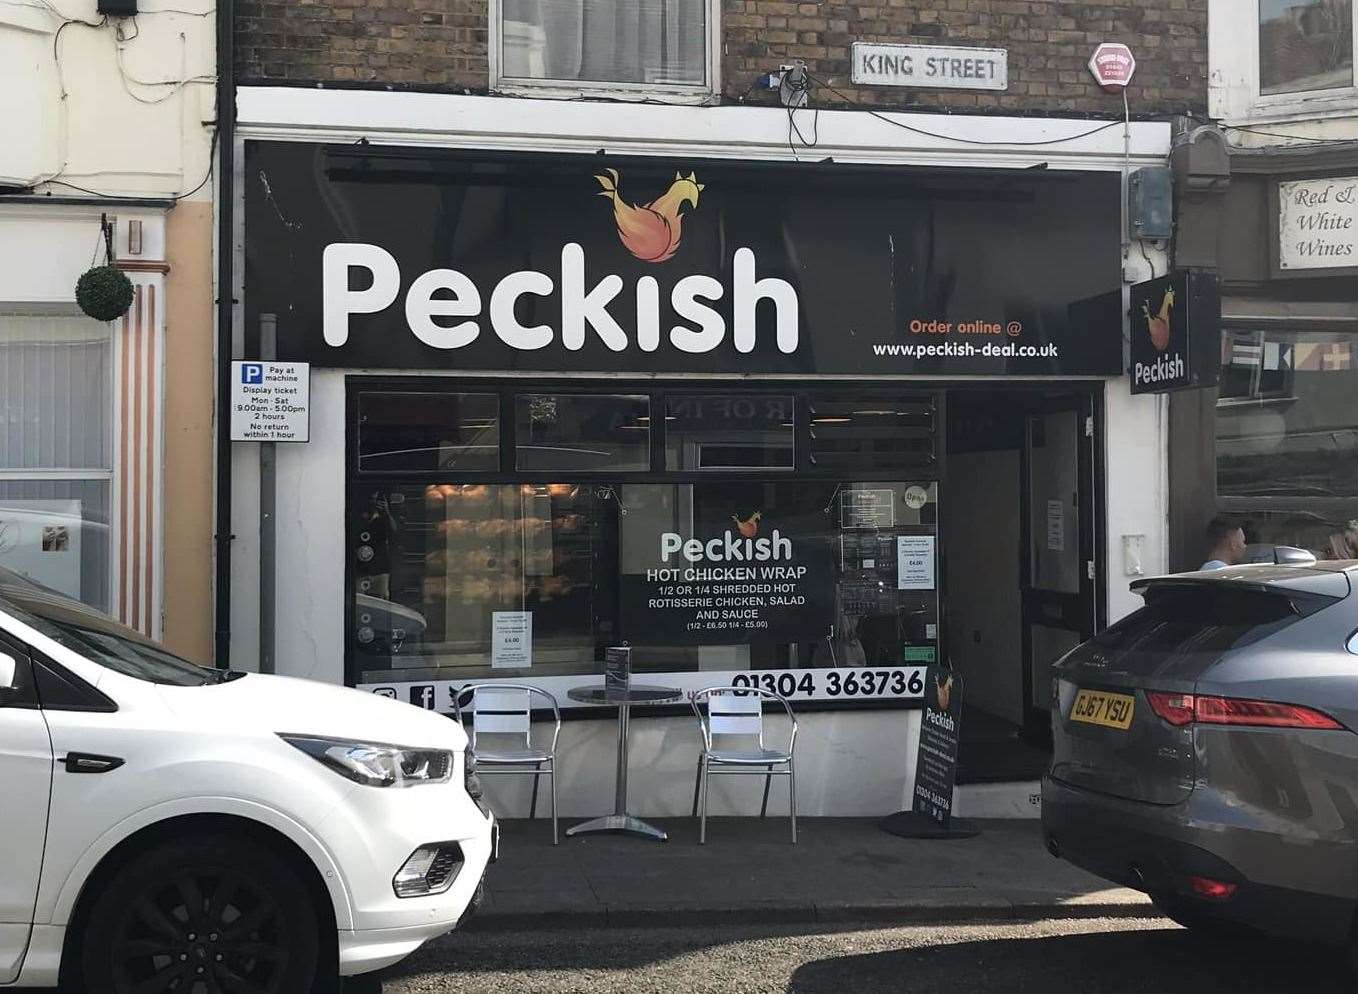 Peckish in Dover has now closed